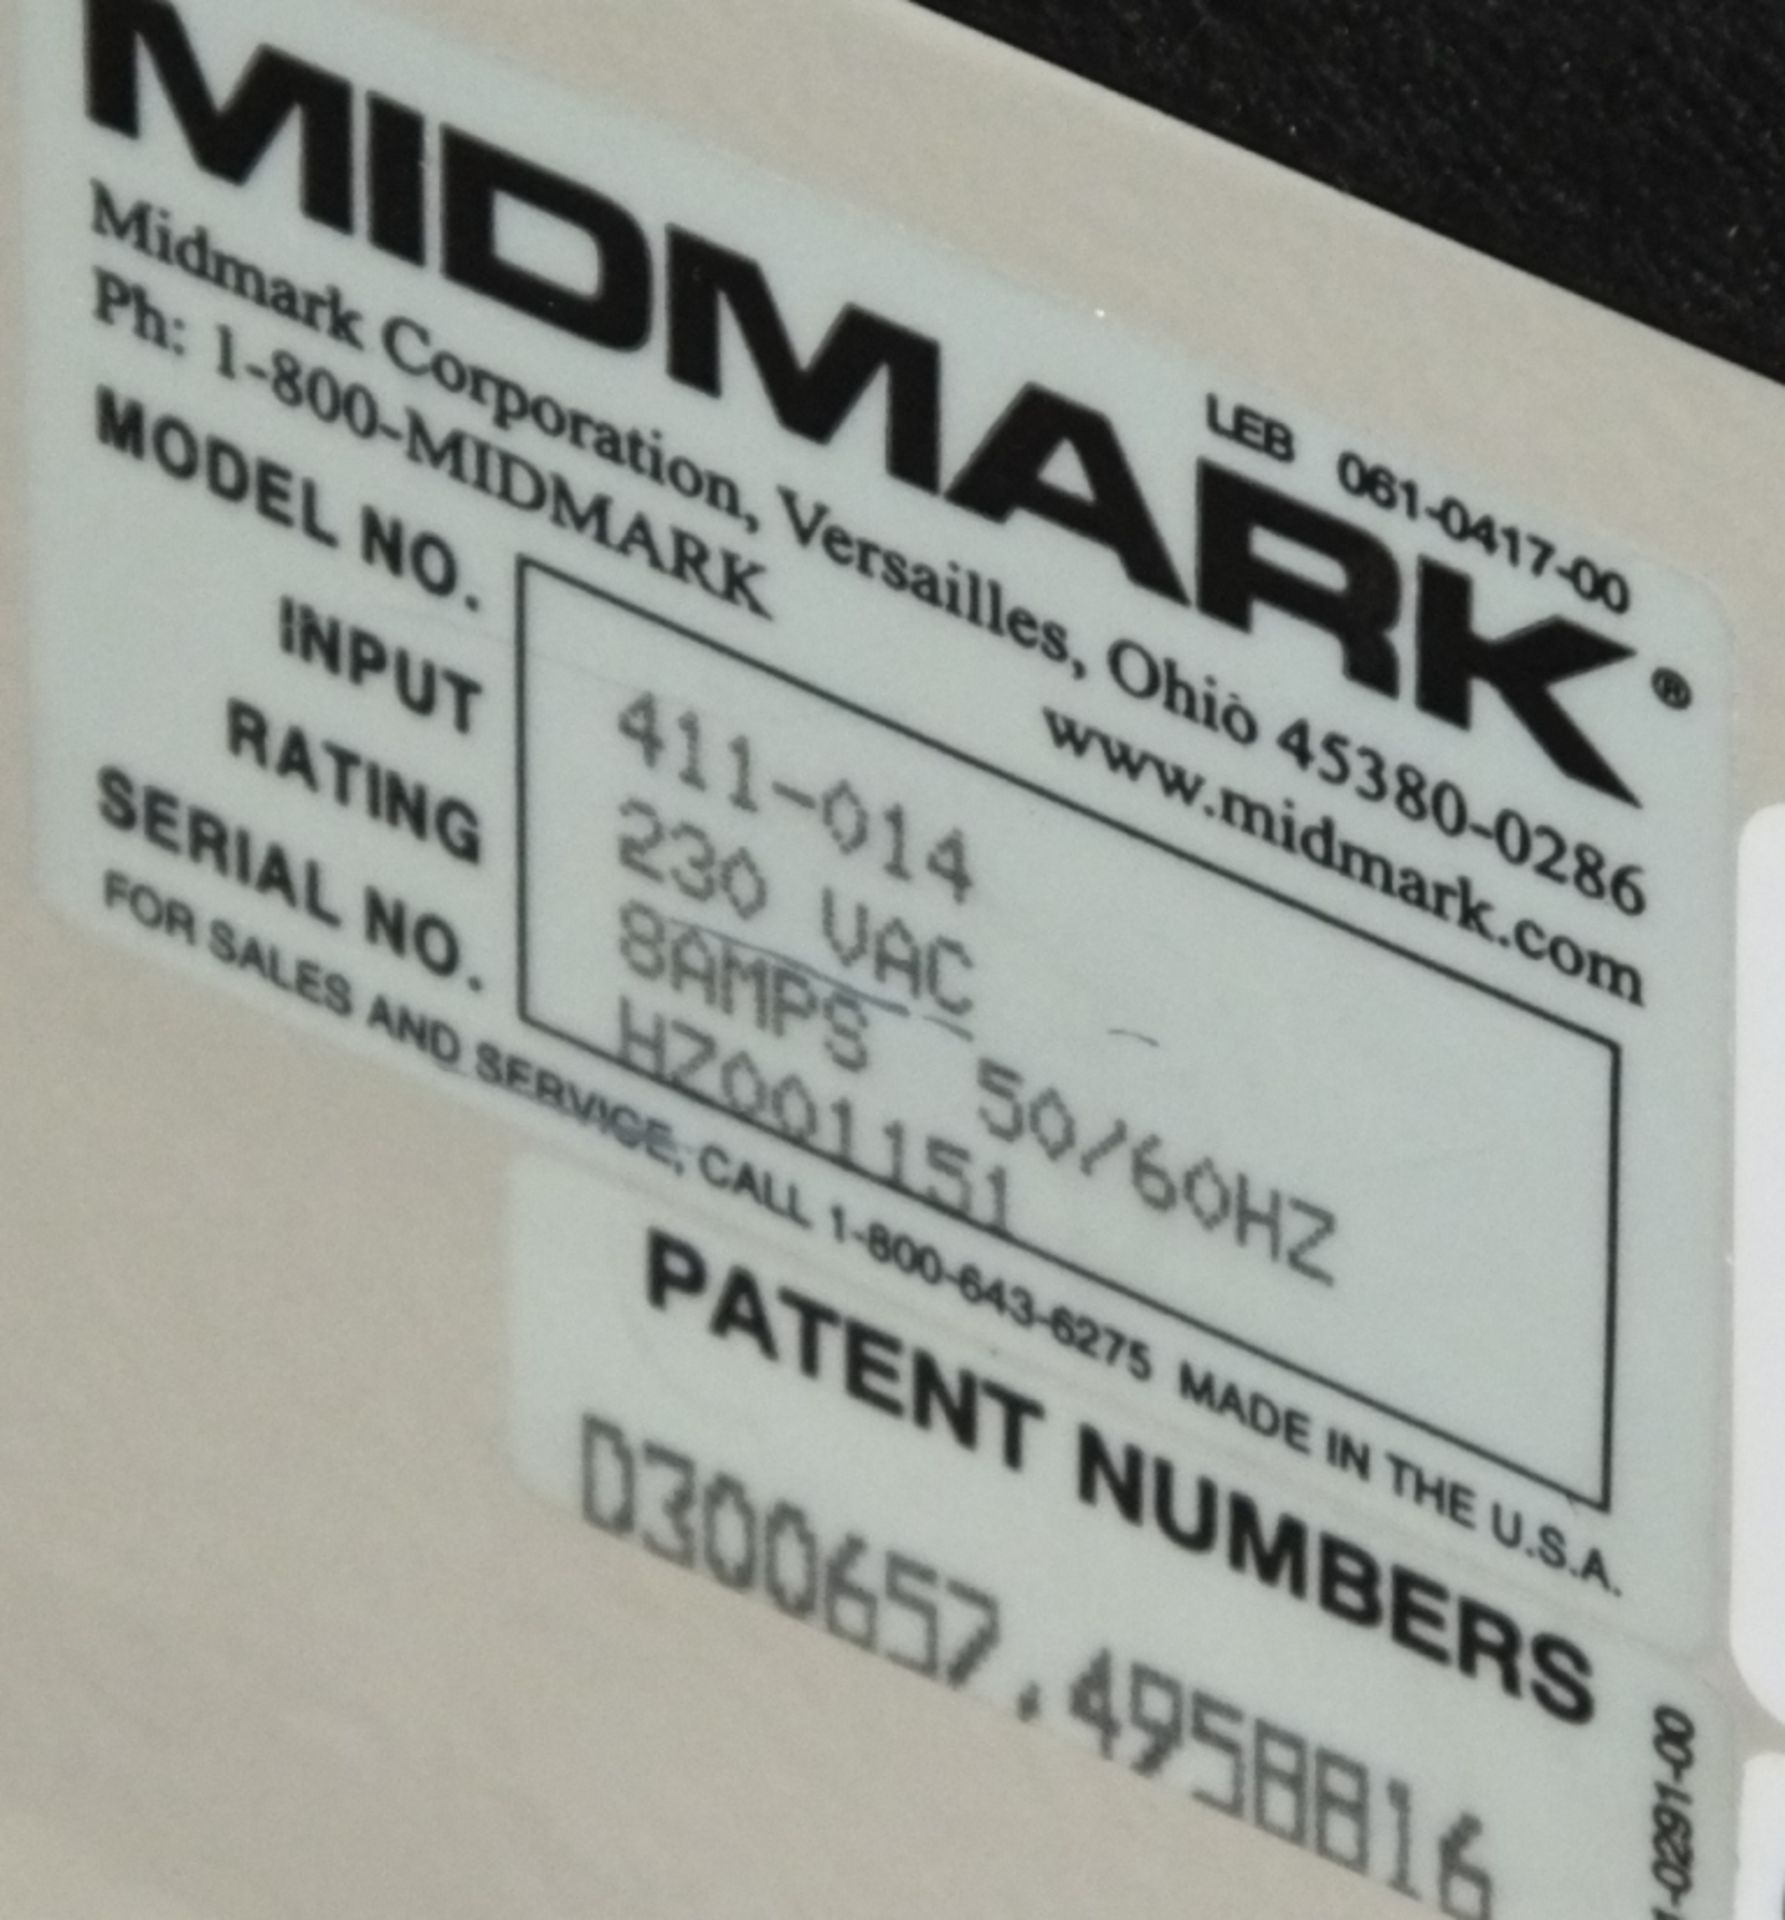 Midmark 411-404 medical examination chair - Image 3 of 6